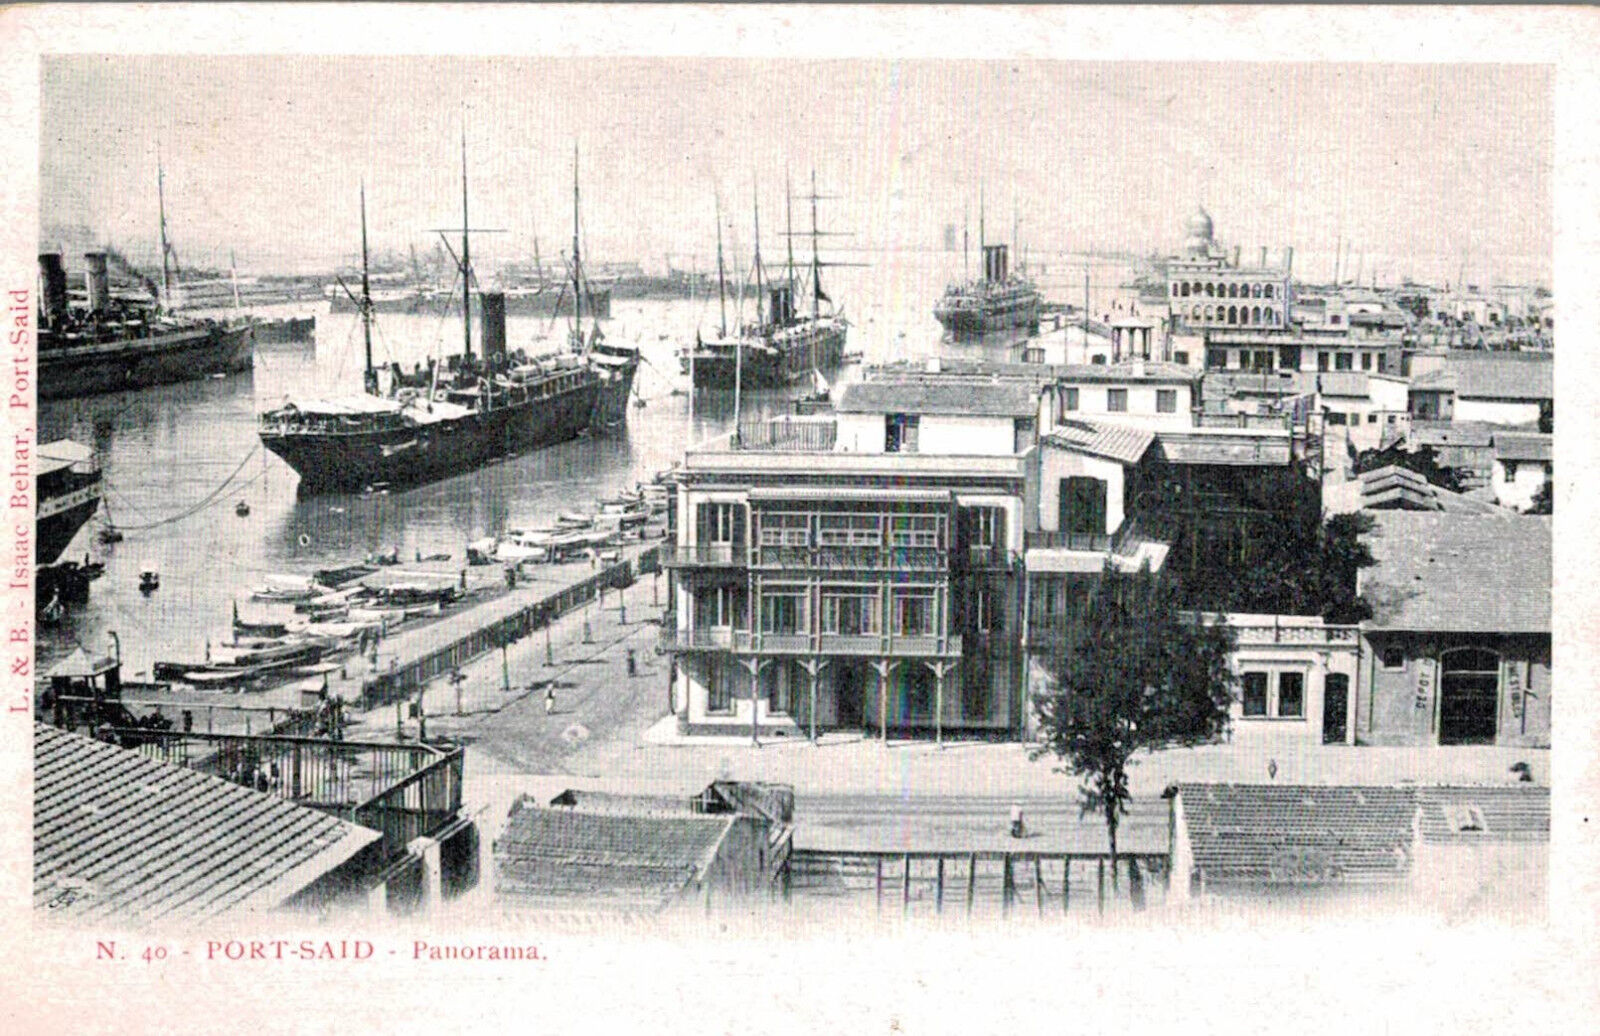 Port Said,Egypt,North Africa,Panorama of Port,Ships in Port,c.1901-06